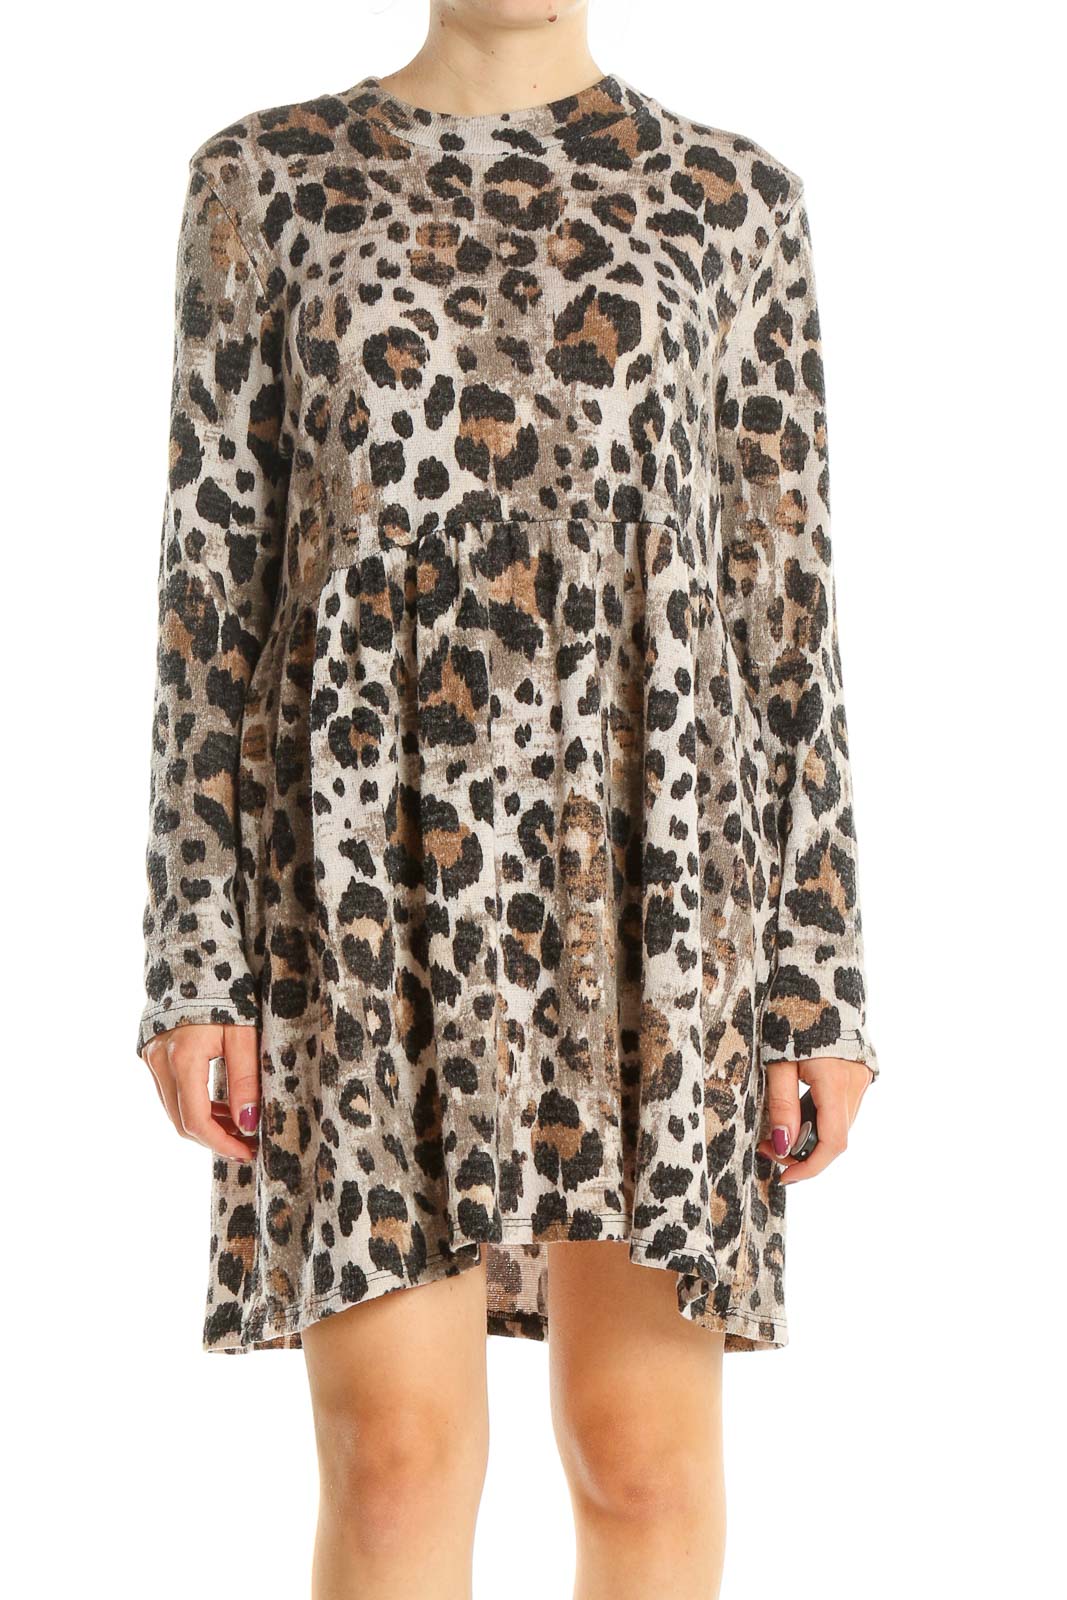 Beige Animal Print Long Sleeve Casual Dress Front